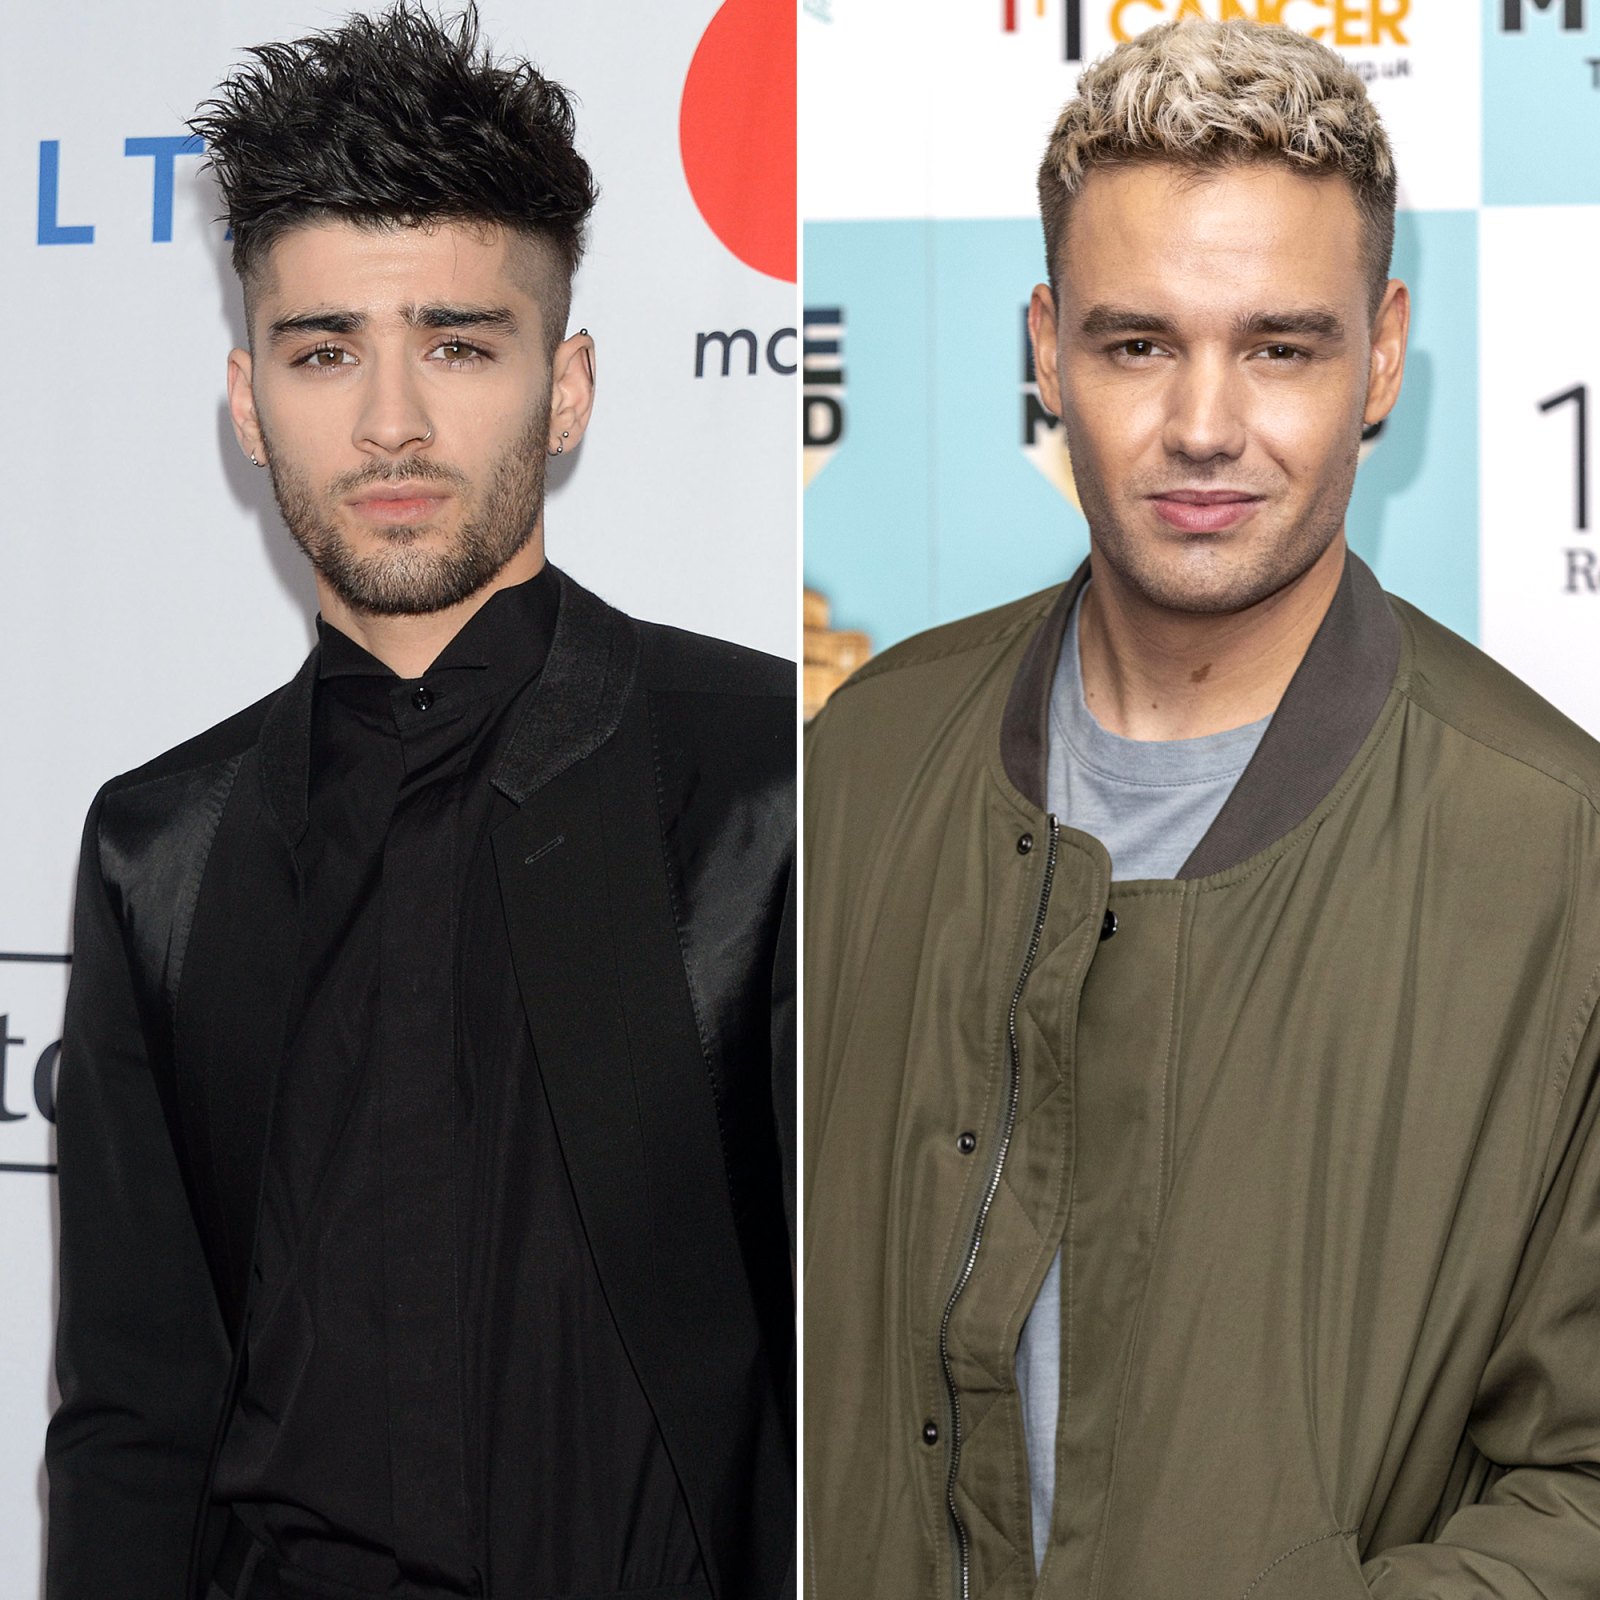 Zayn Malik Sings One Direction Song After Liam Payne Shade Us Weekly 